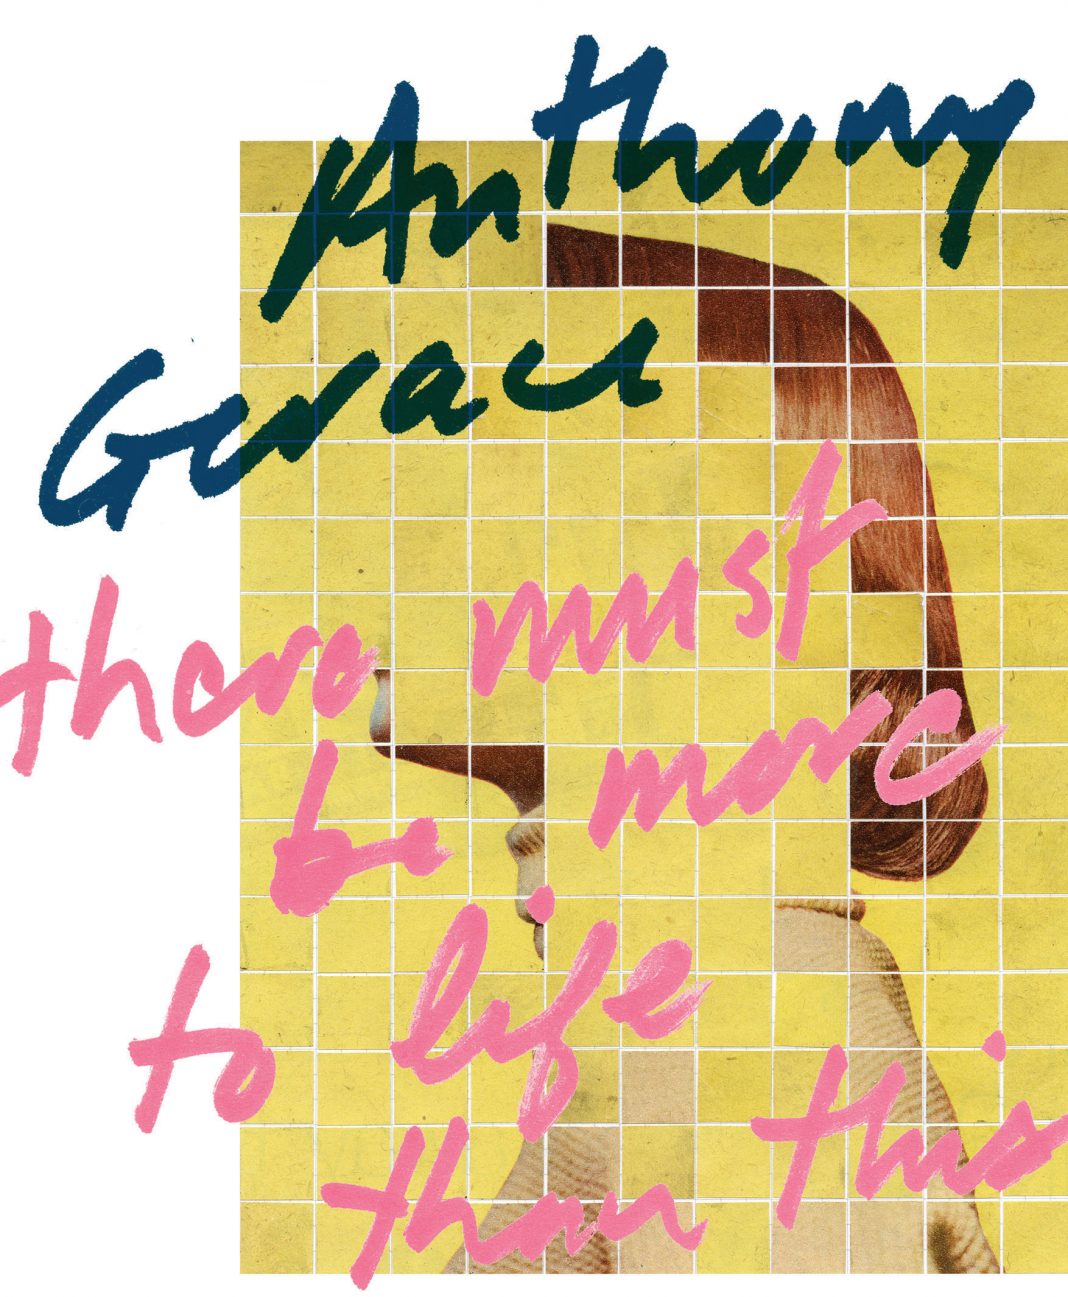 Anthony Gerace – There must be more to life than thishttps://www.exibart.com/repository/media/eventi/2015/11/anthony-gerace-8211-there-must-be-more-to-life-than-this-1068x1297.jpg